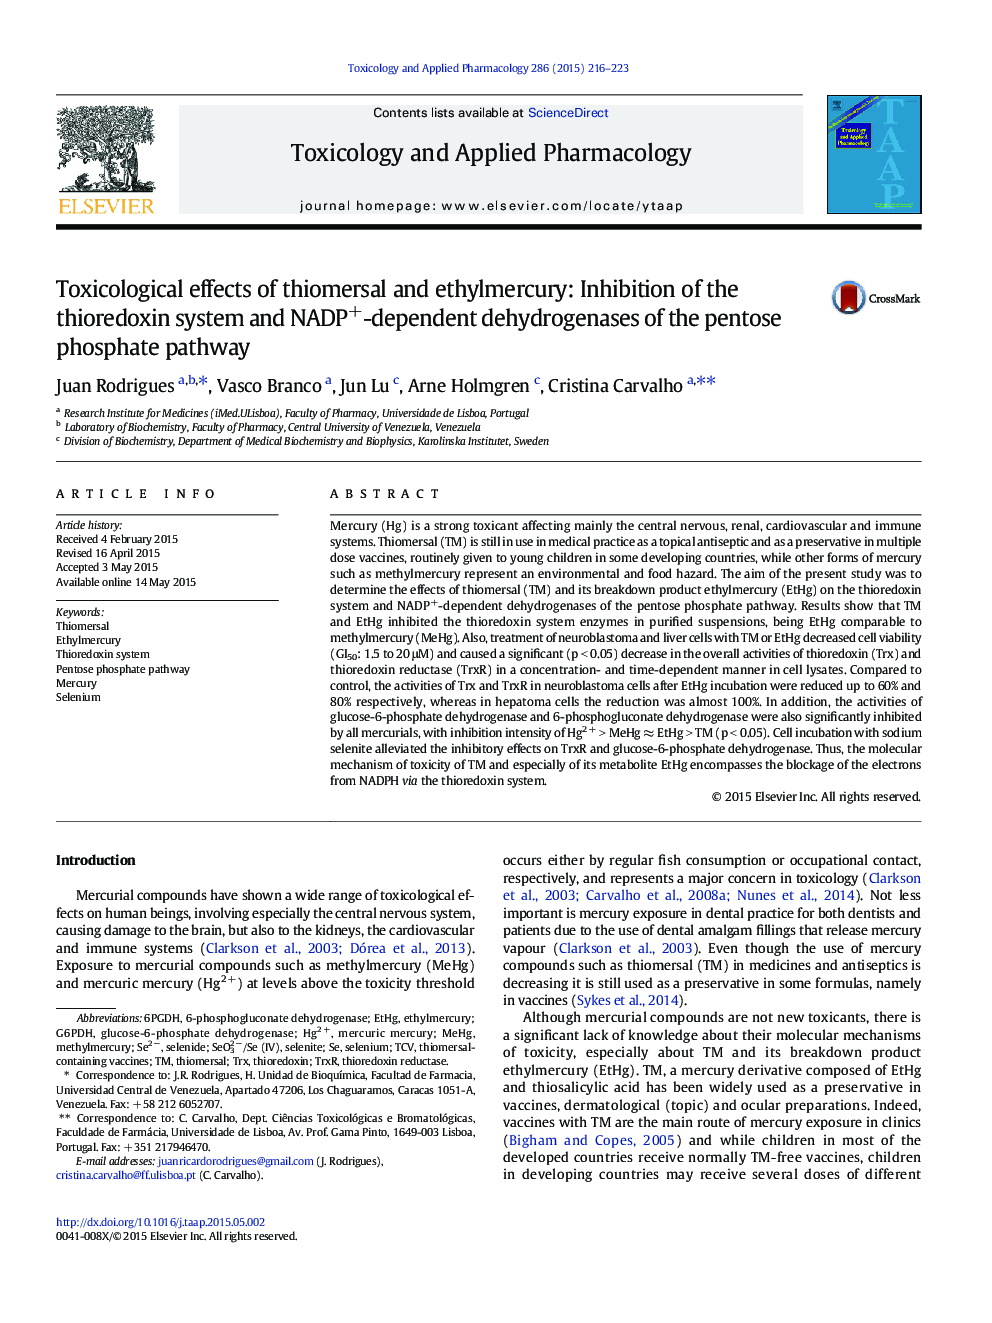 Toxicological effects of thiomersal and ethylmercury: Inhibition of the thioredoxin system and NADP+-dependent dehydrogenases of the pentose phosphate pathway